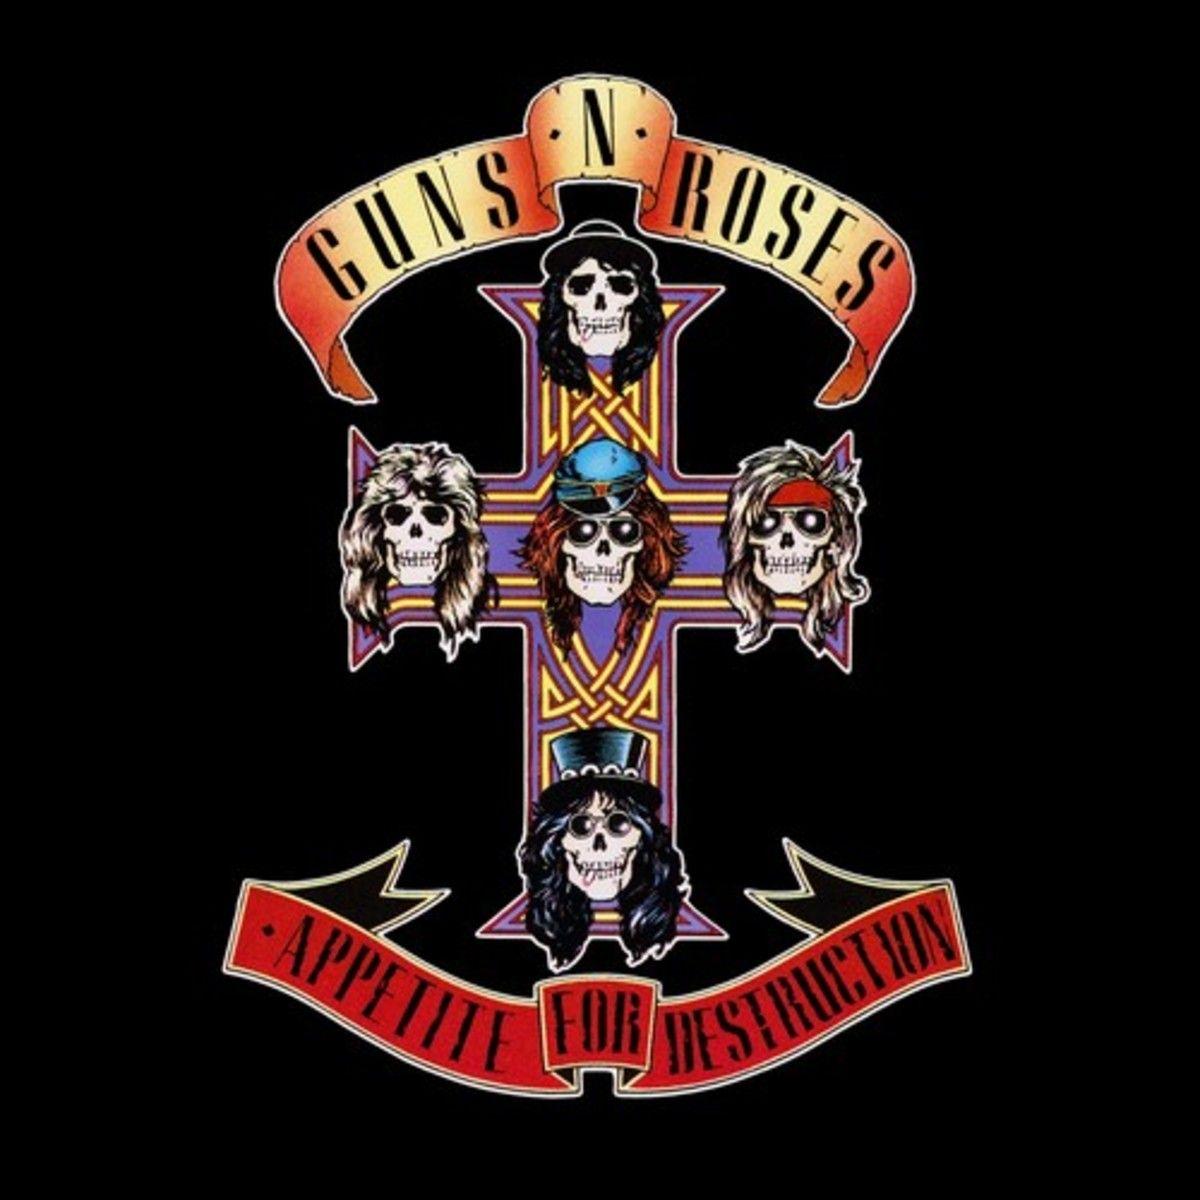 Iconic Rock Band Logo - Guns N' Roses: The Greatest Rock Band Of All Time - Sabotage Times